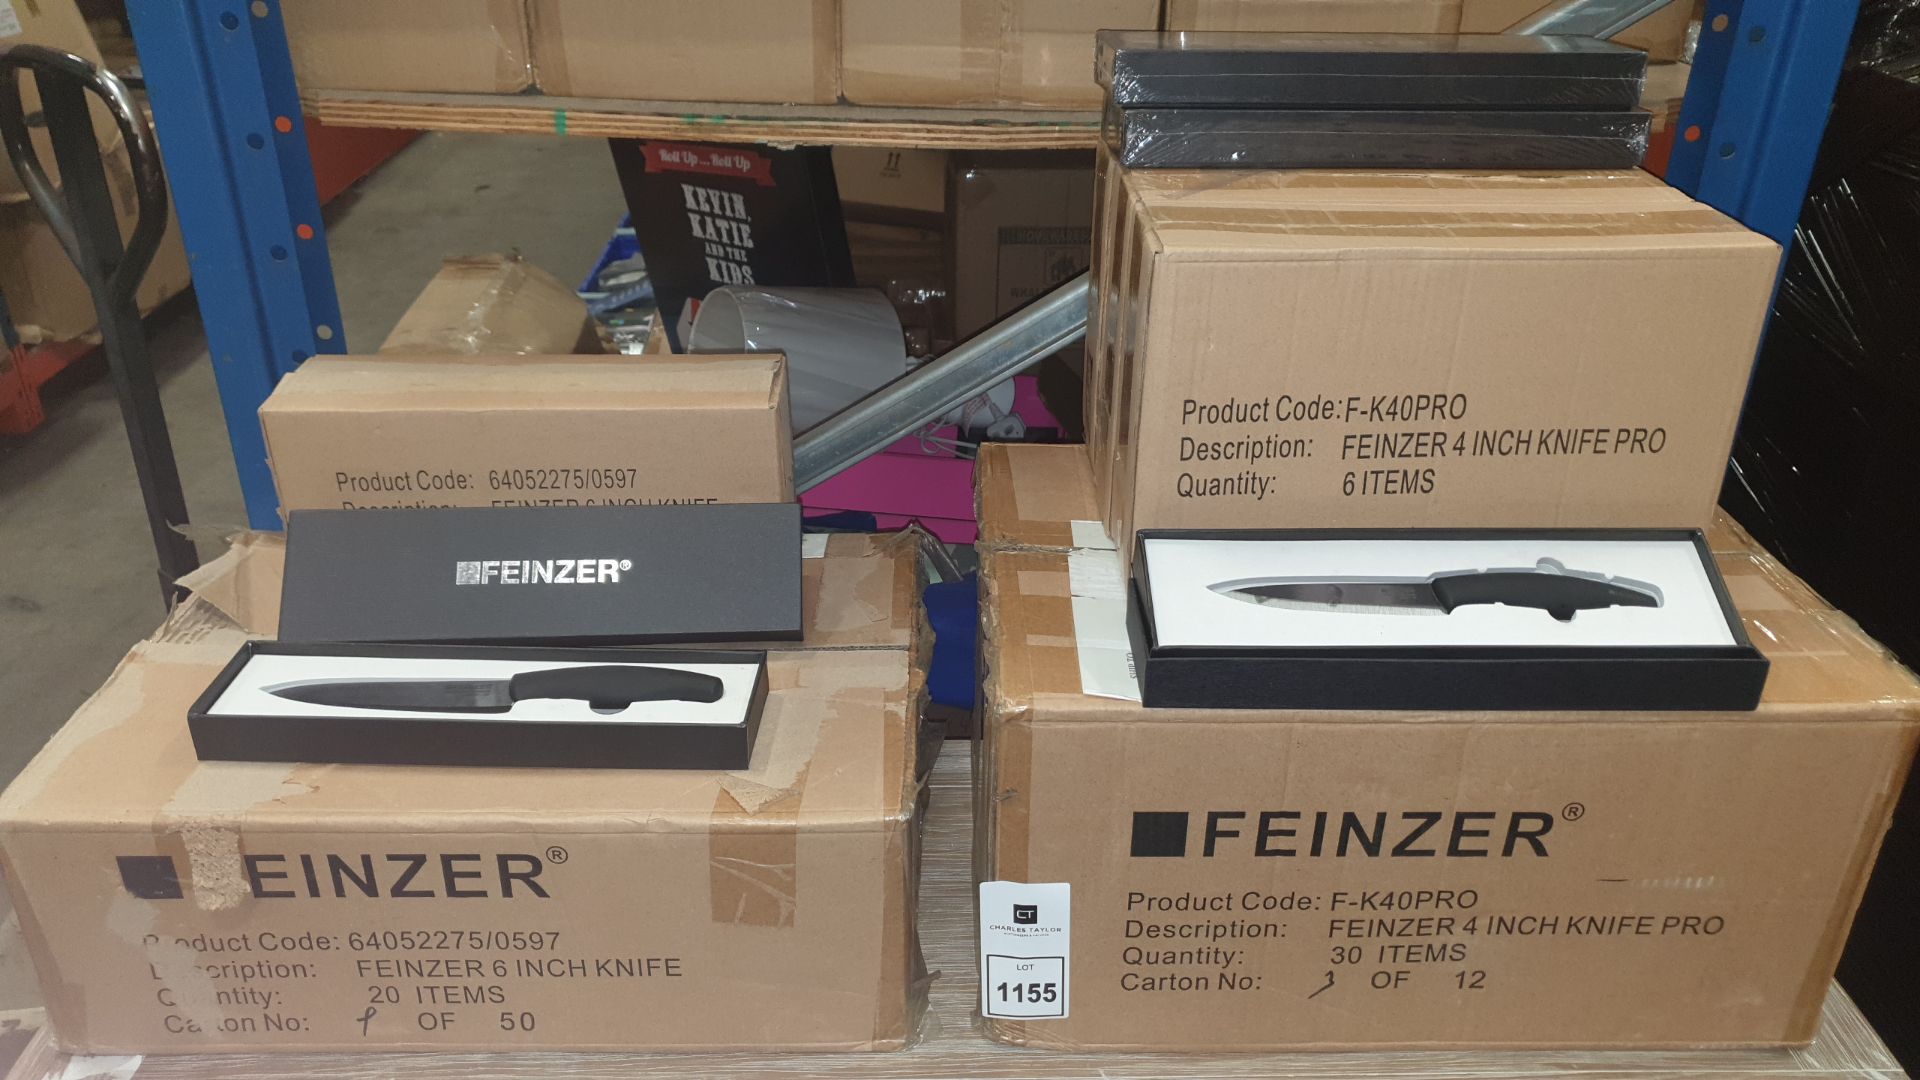 72 ASSORTED FEINZER PROFESSIONAL KNIVES COMPRISING 24 X BRAND NEW FEINZER 6 INCH KNIVES AND 48 X